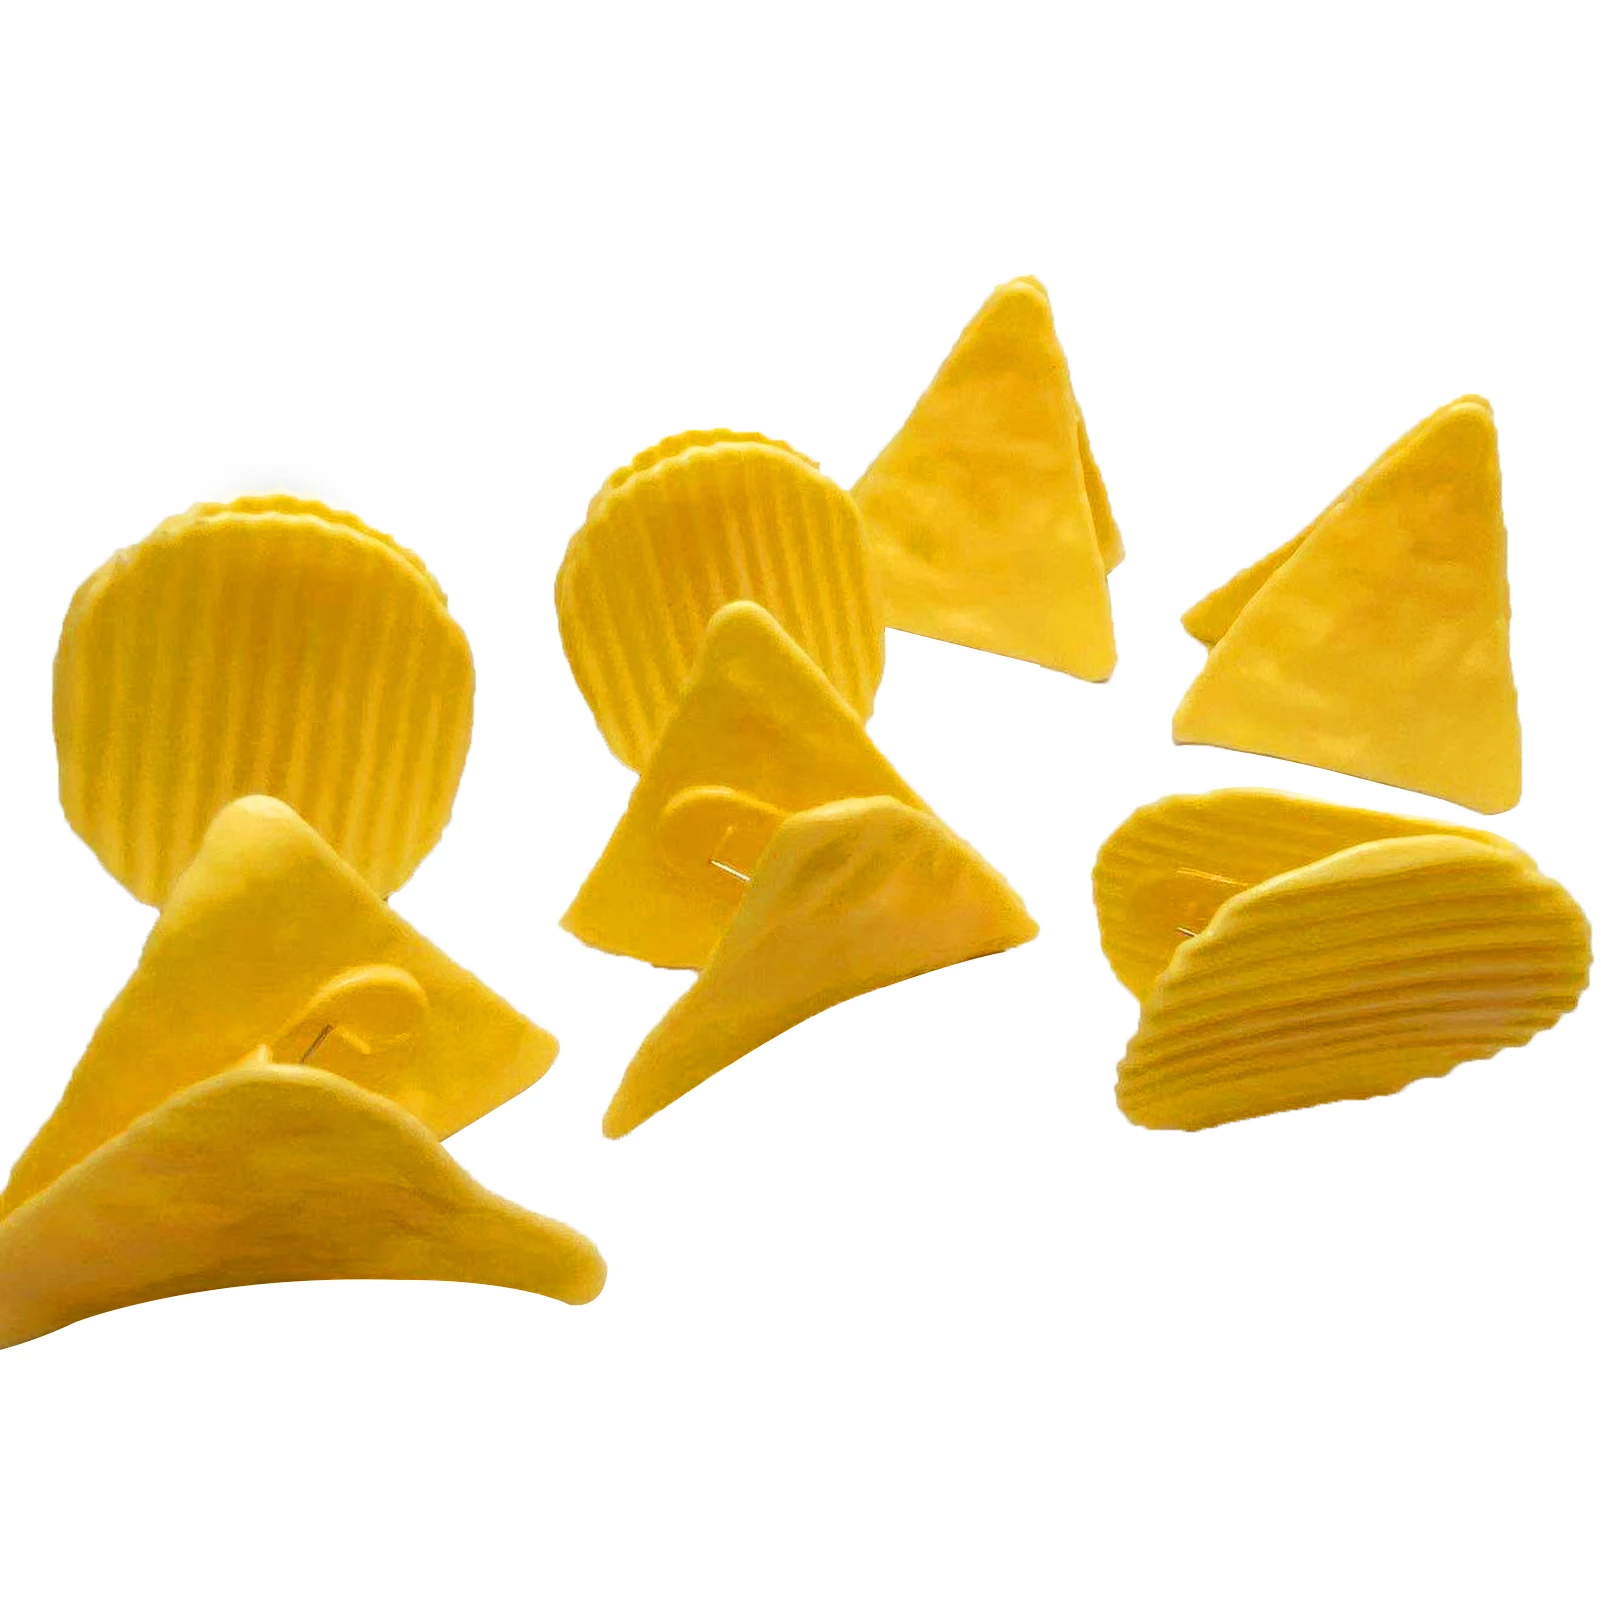 

6pcs/set Creative Potato Chip Shape Clips Crisps Airtight Food Bag Sealing Clips Closure Clip For Coffee Bags Candy Snack Bags